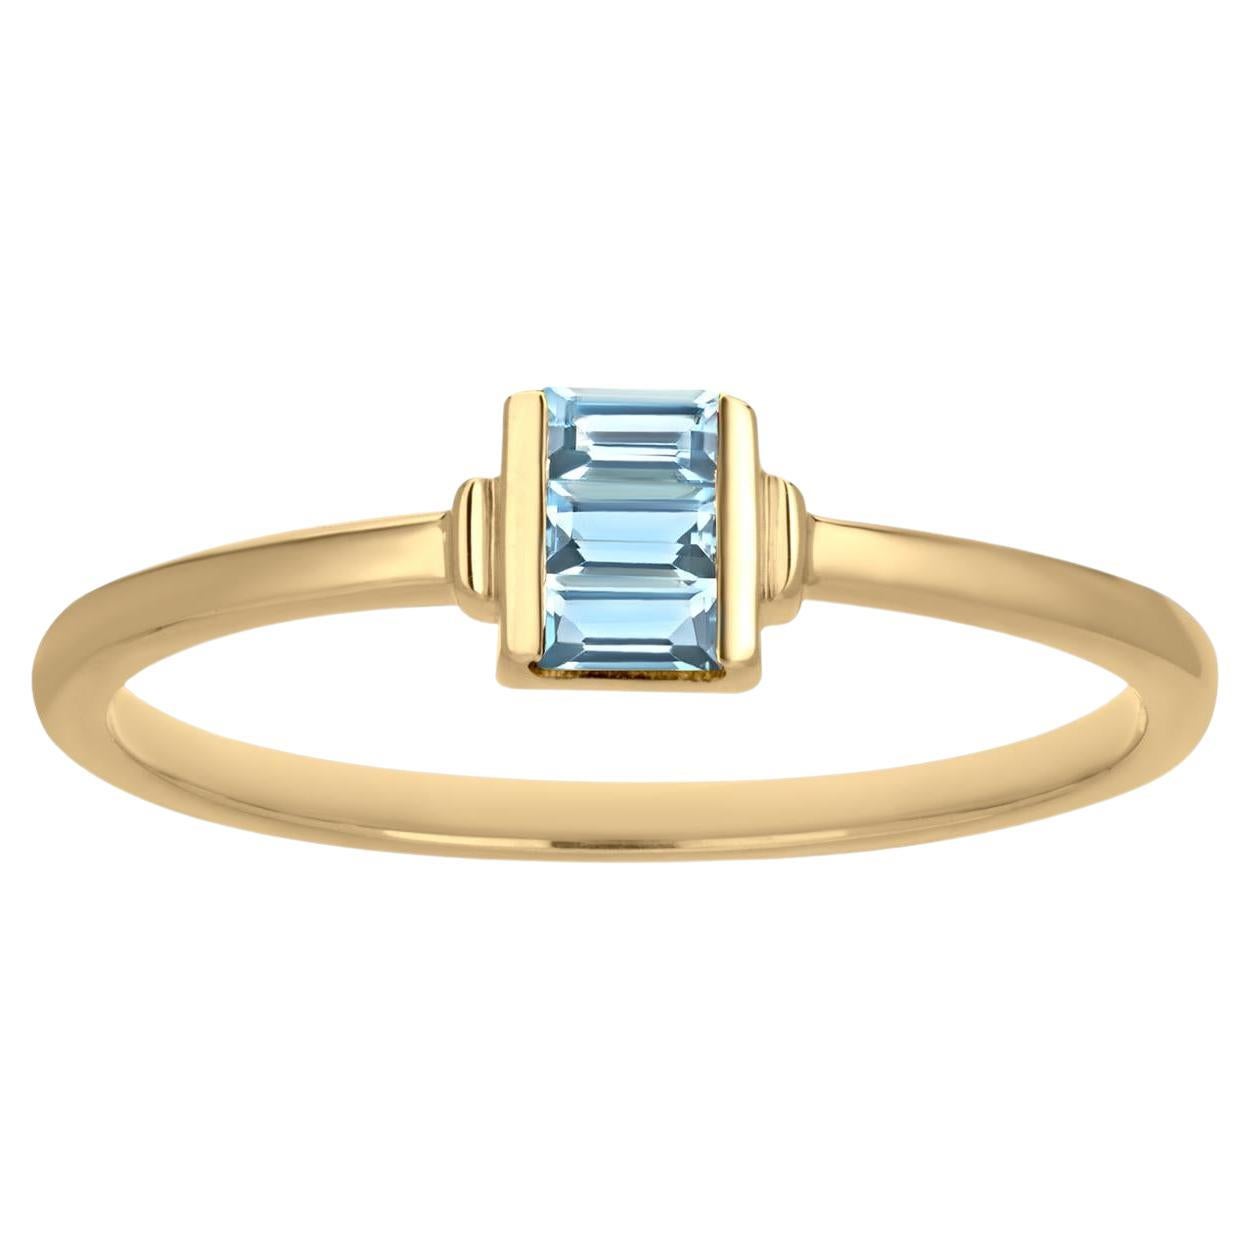 Gemistry 0.22 Cttw. Baguette-Shaped Blue Topaz Band Ring in 14k Yellow Gold